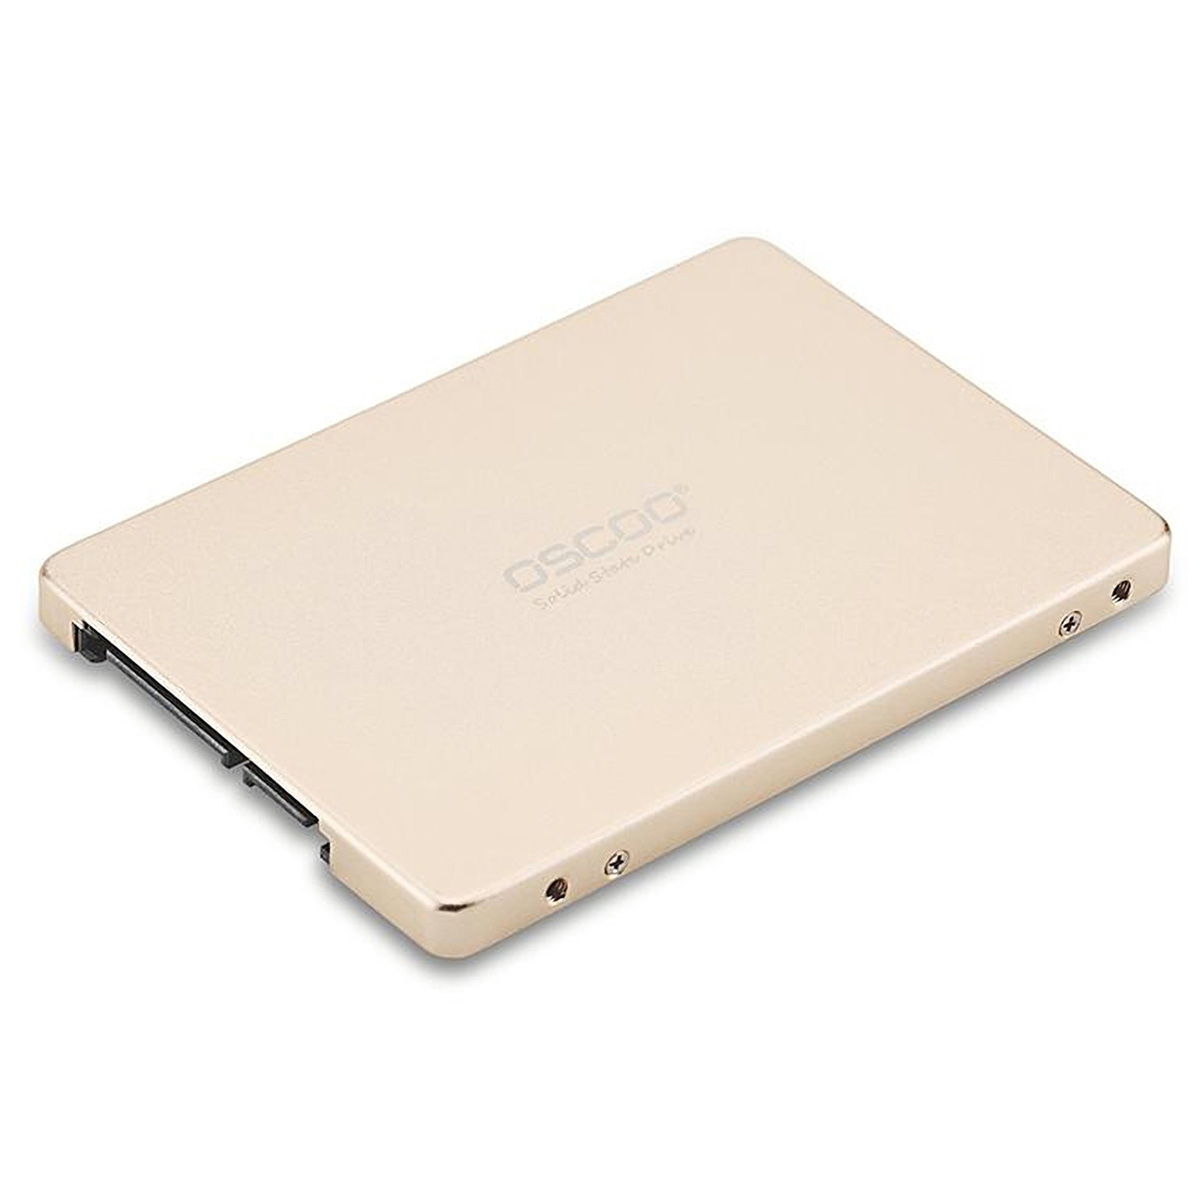 OSCOO-64GB-25-inch-SATA3-SSD-Solid-State-Drive-Aluminium-alloy-Internal-Hard-Disk-Support-TRIM-1296343-5